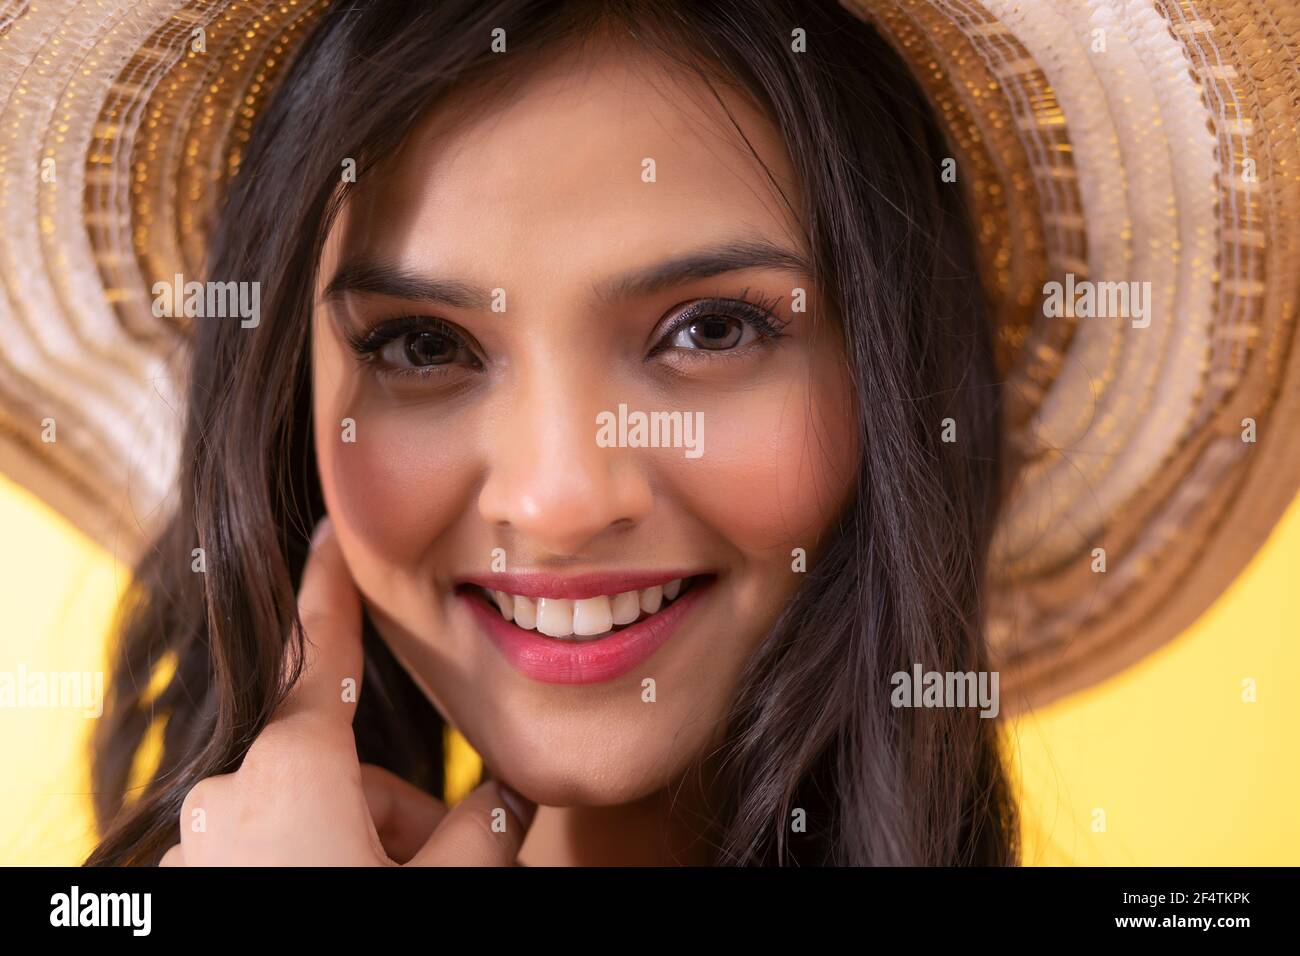 CLOSE SHOT OF A YOUNG WOMAN CHEERFULLY POSING IN FRONT OF CAMERA Stock Photo